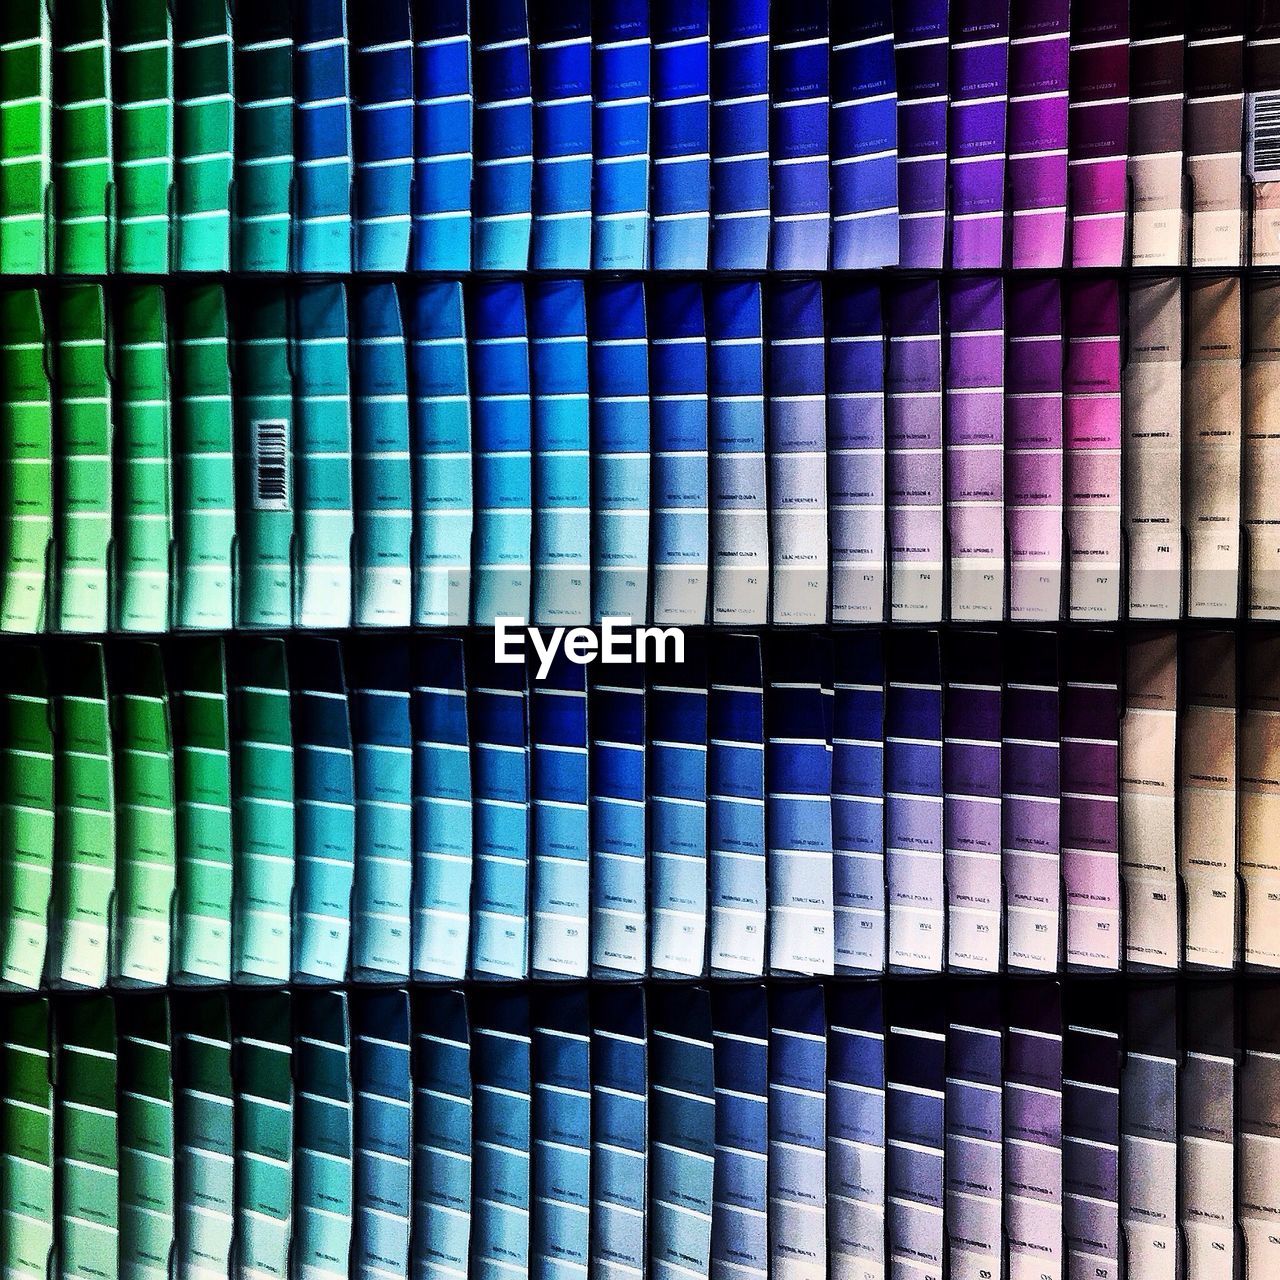 Large display of paint swatches